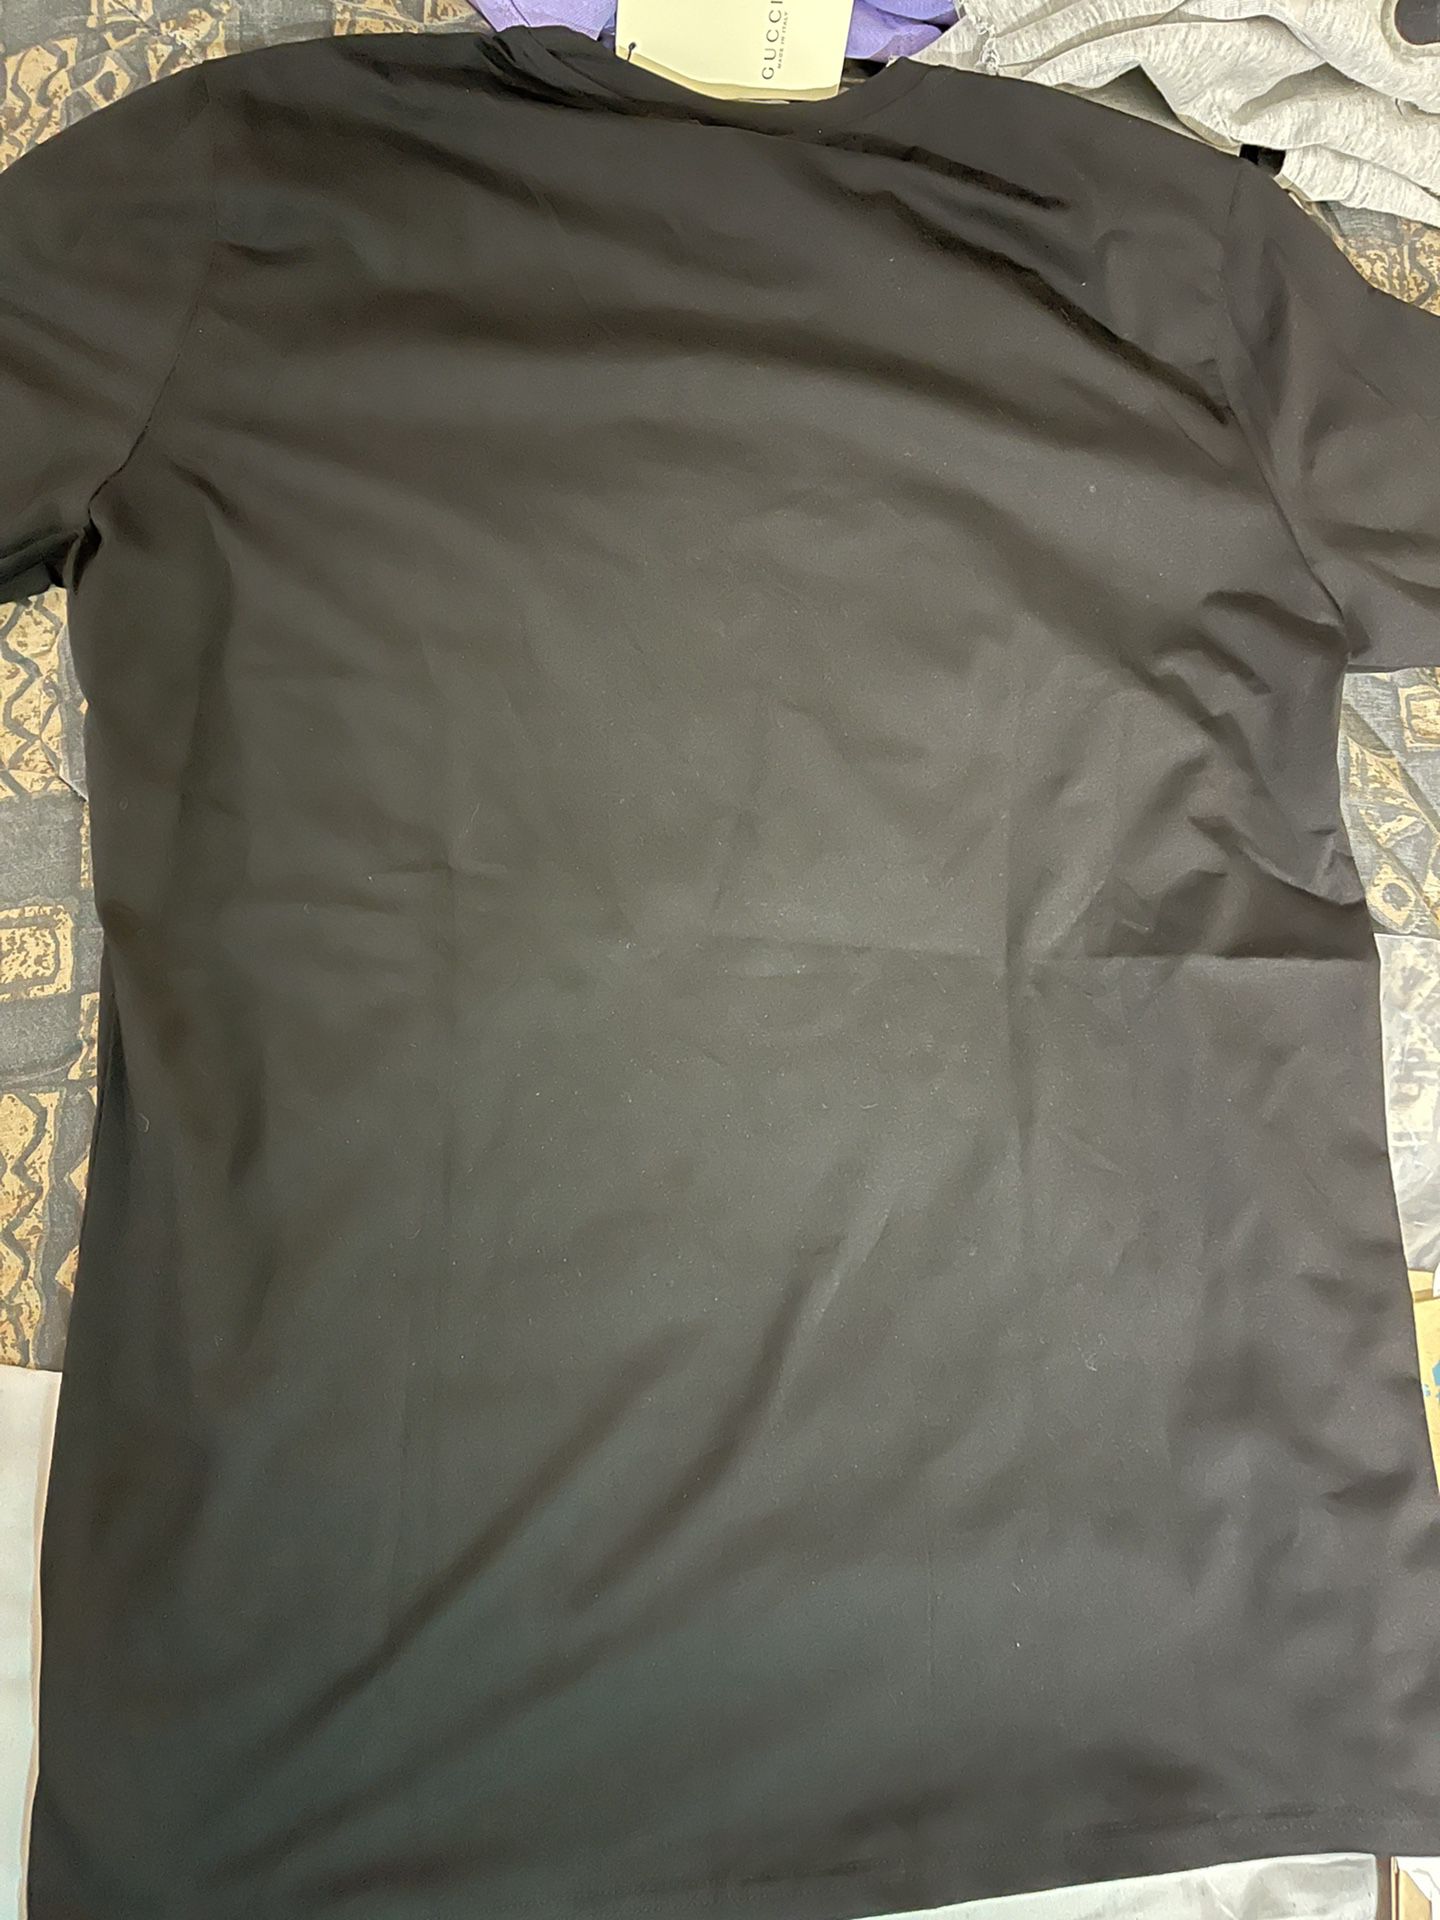 2 Of Men's GG Bear White or Black Shirt XL Gucci Not Burberry Fendi Louis  Vuitton for Sale in Jersey City, NJ - OfferUp